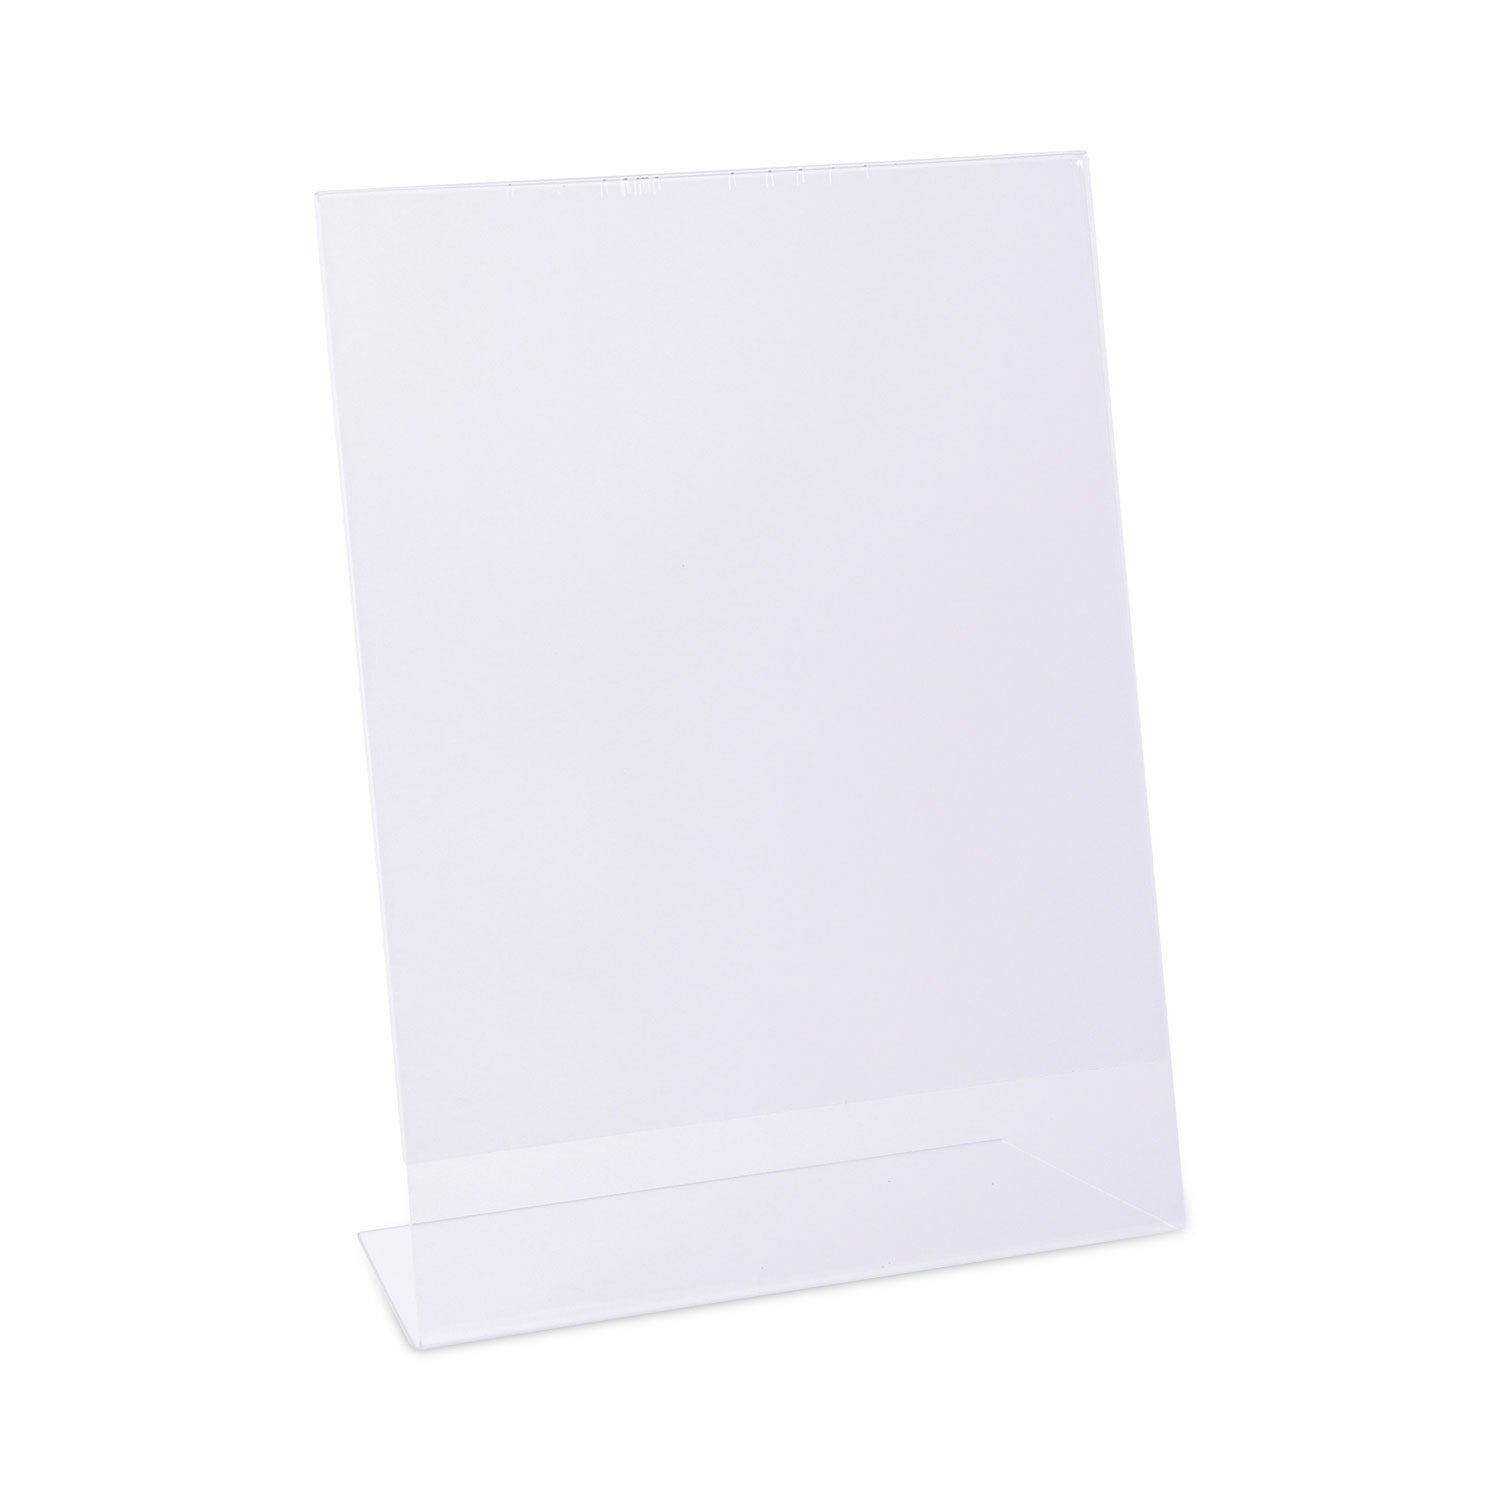 Clear L-Style Freestanding Frame, 8.5 x 11 Insert, 3/Pack - 